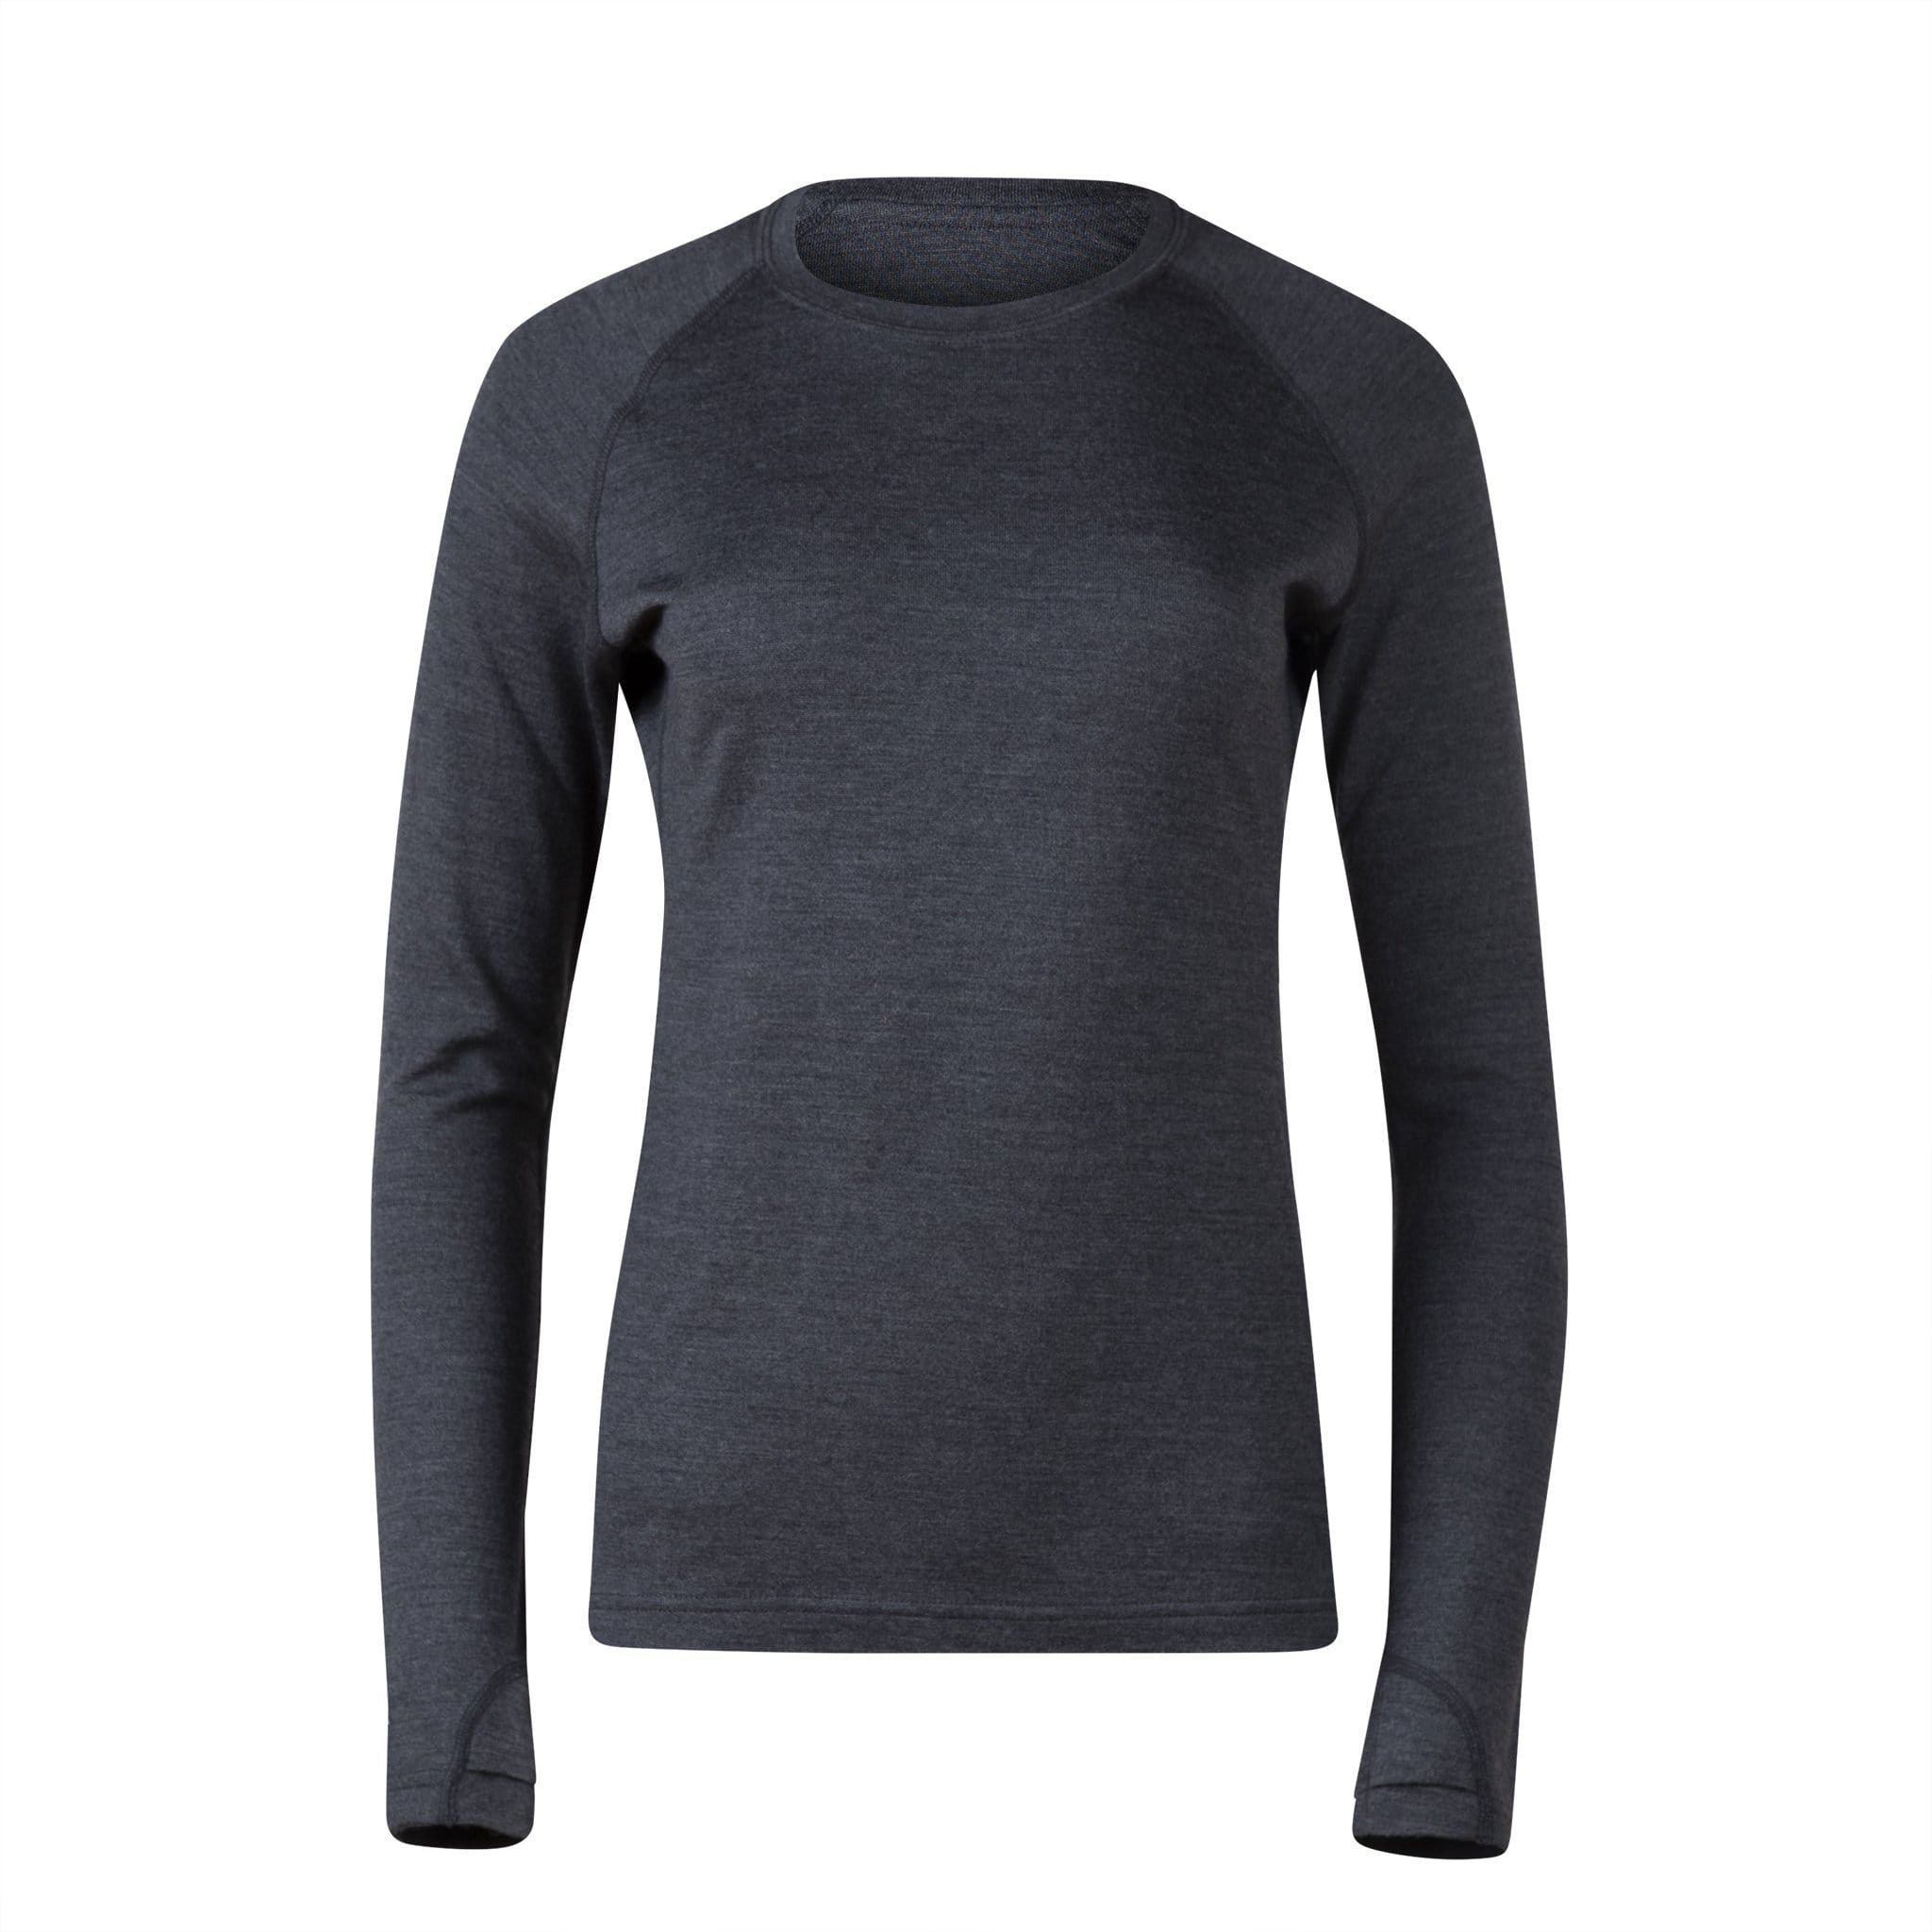 Women's Wool Long Sleeve Base Layer Chill Chasers Collection (Merino Wool)